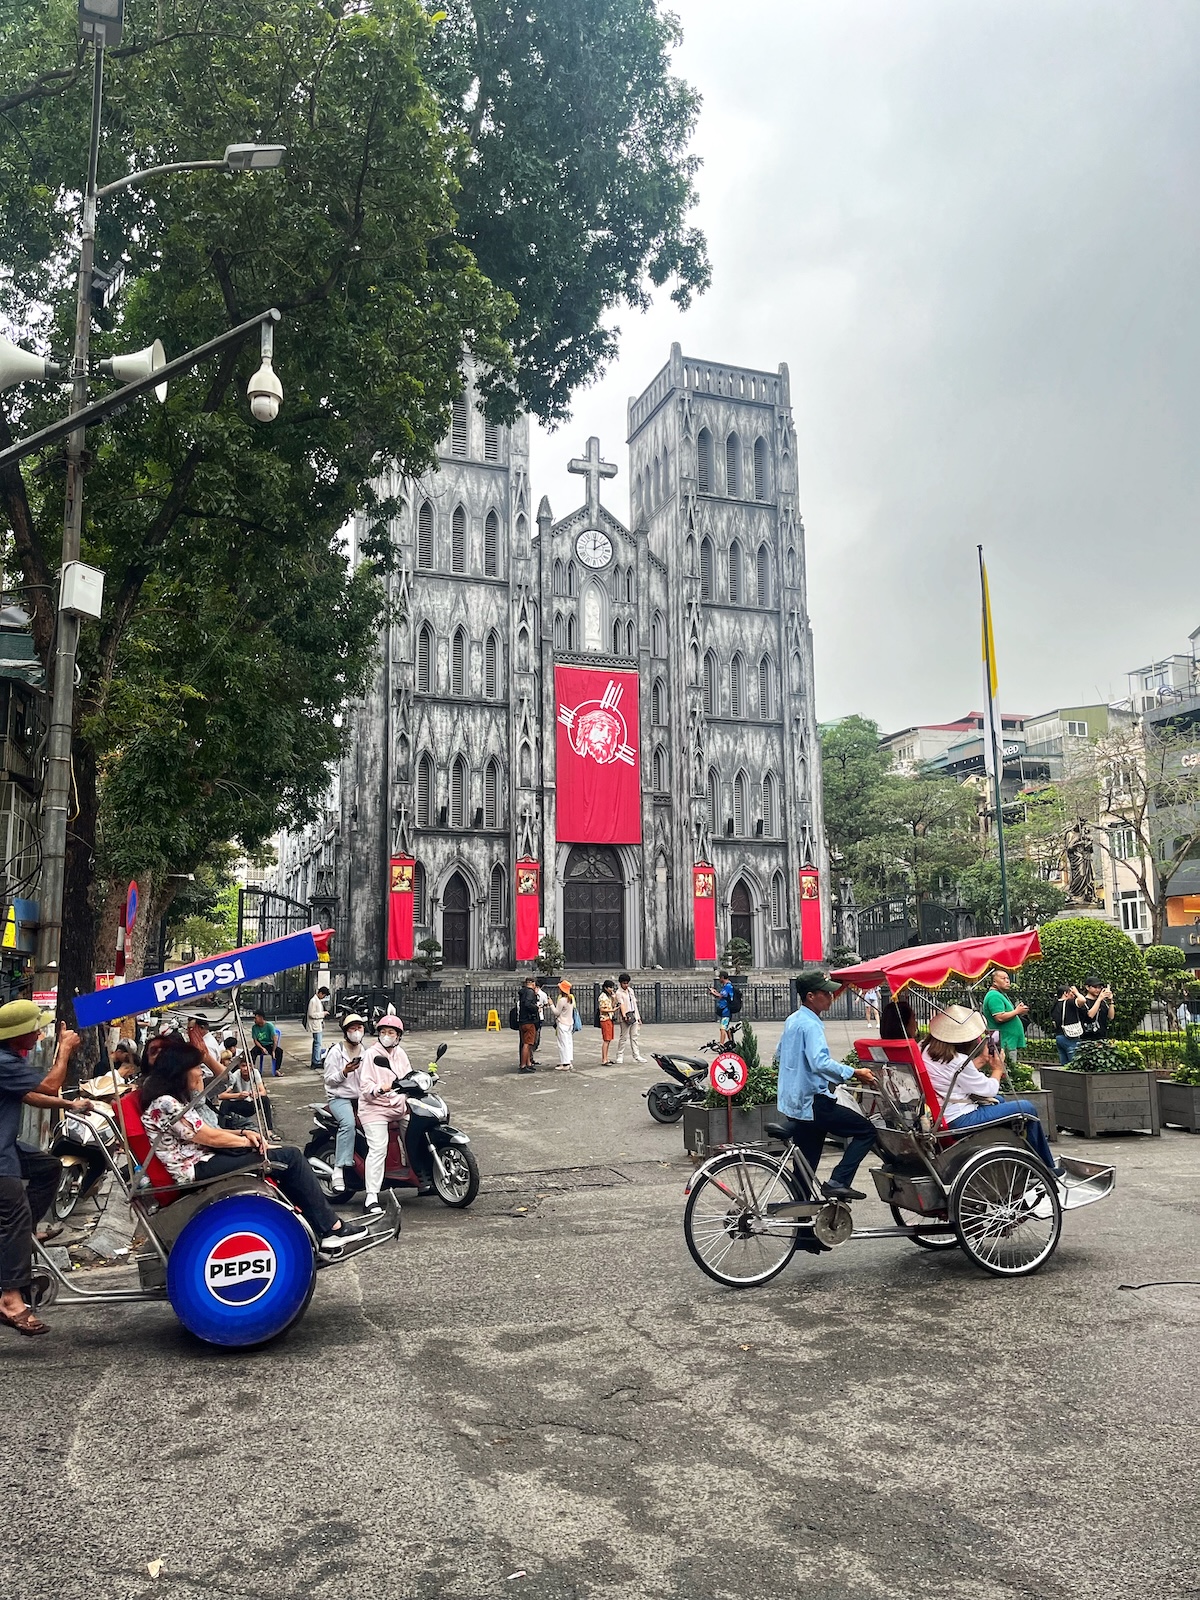 A grey gothic building with red decorations in front of busy traffic in central Hanoi, Vietnam